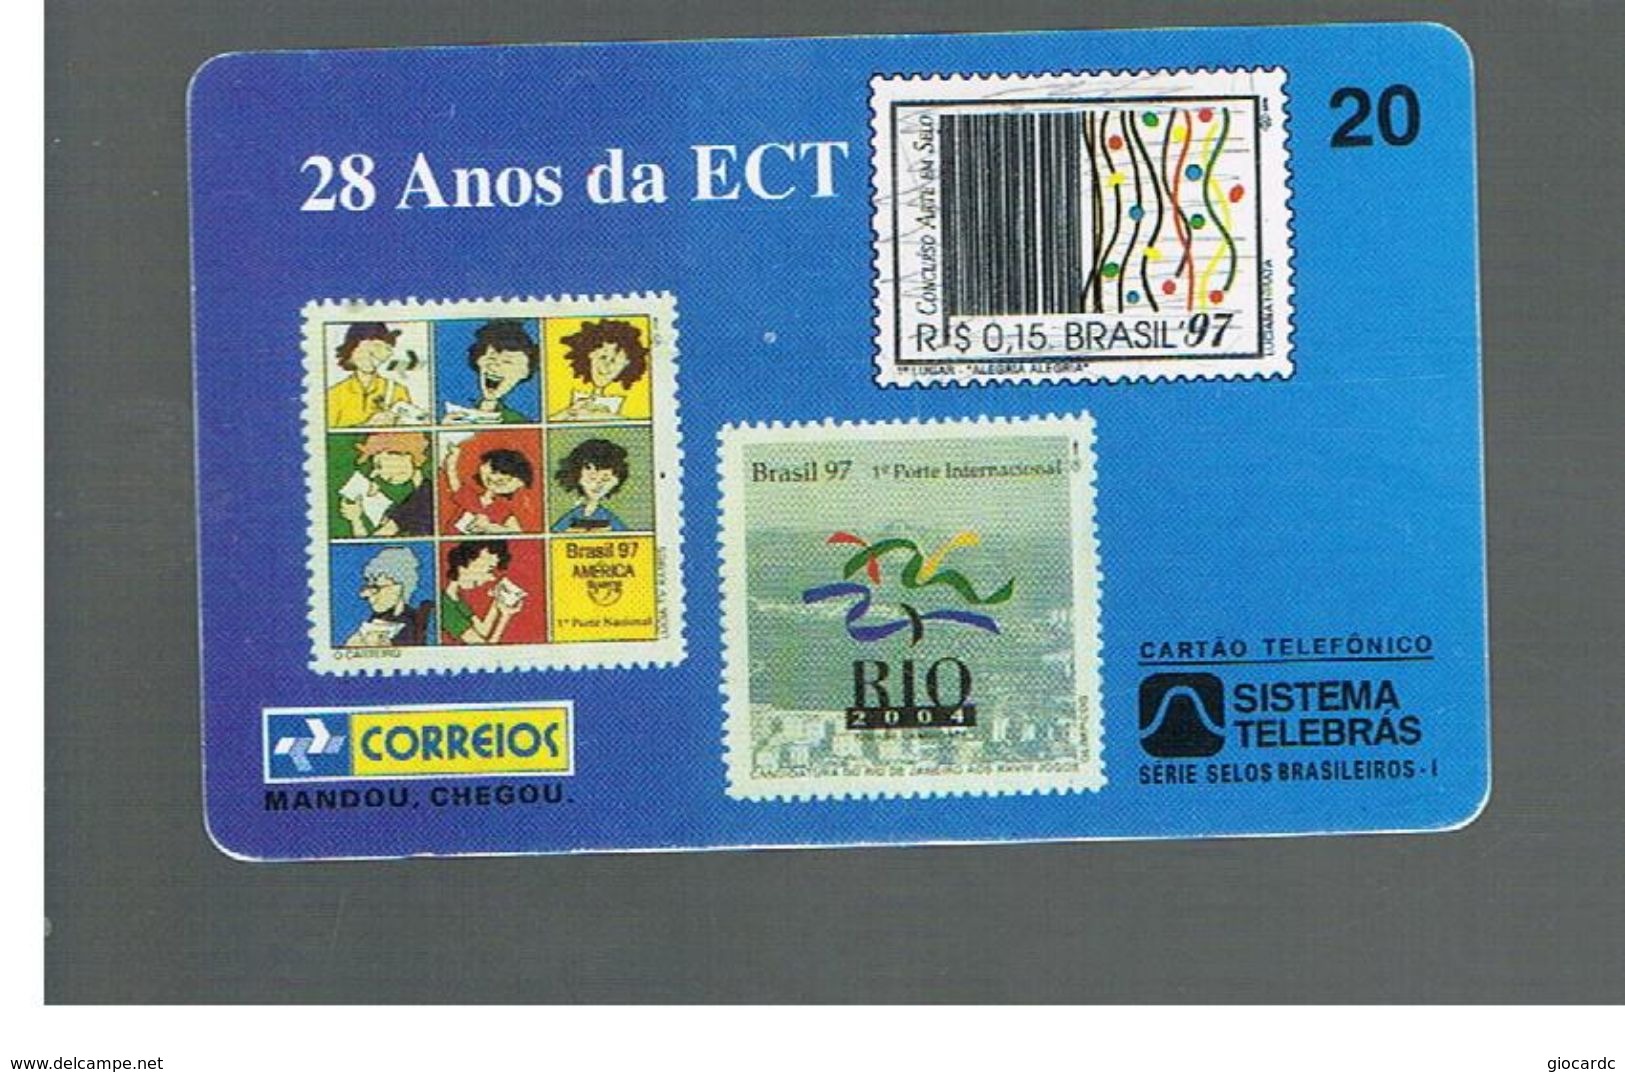 BRASILE ( BRAZIL) - TELEBRAS   -   1997  28 YEARS OF ECT, STAMPS       - USED - RIF.10541 - Timbres & Monnaies